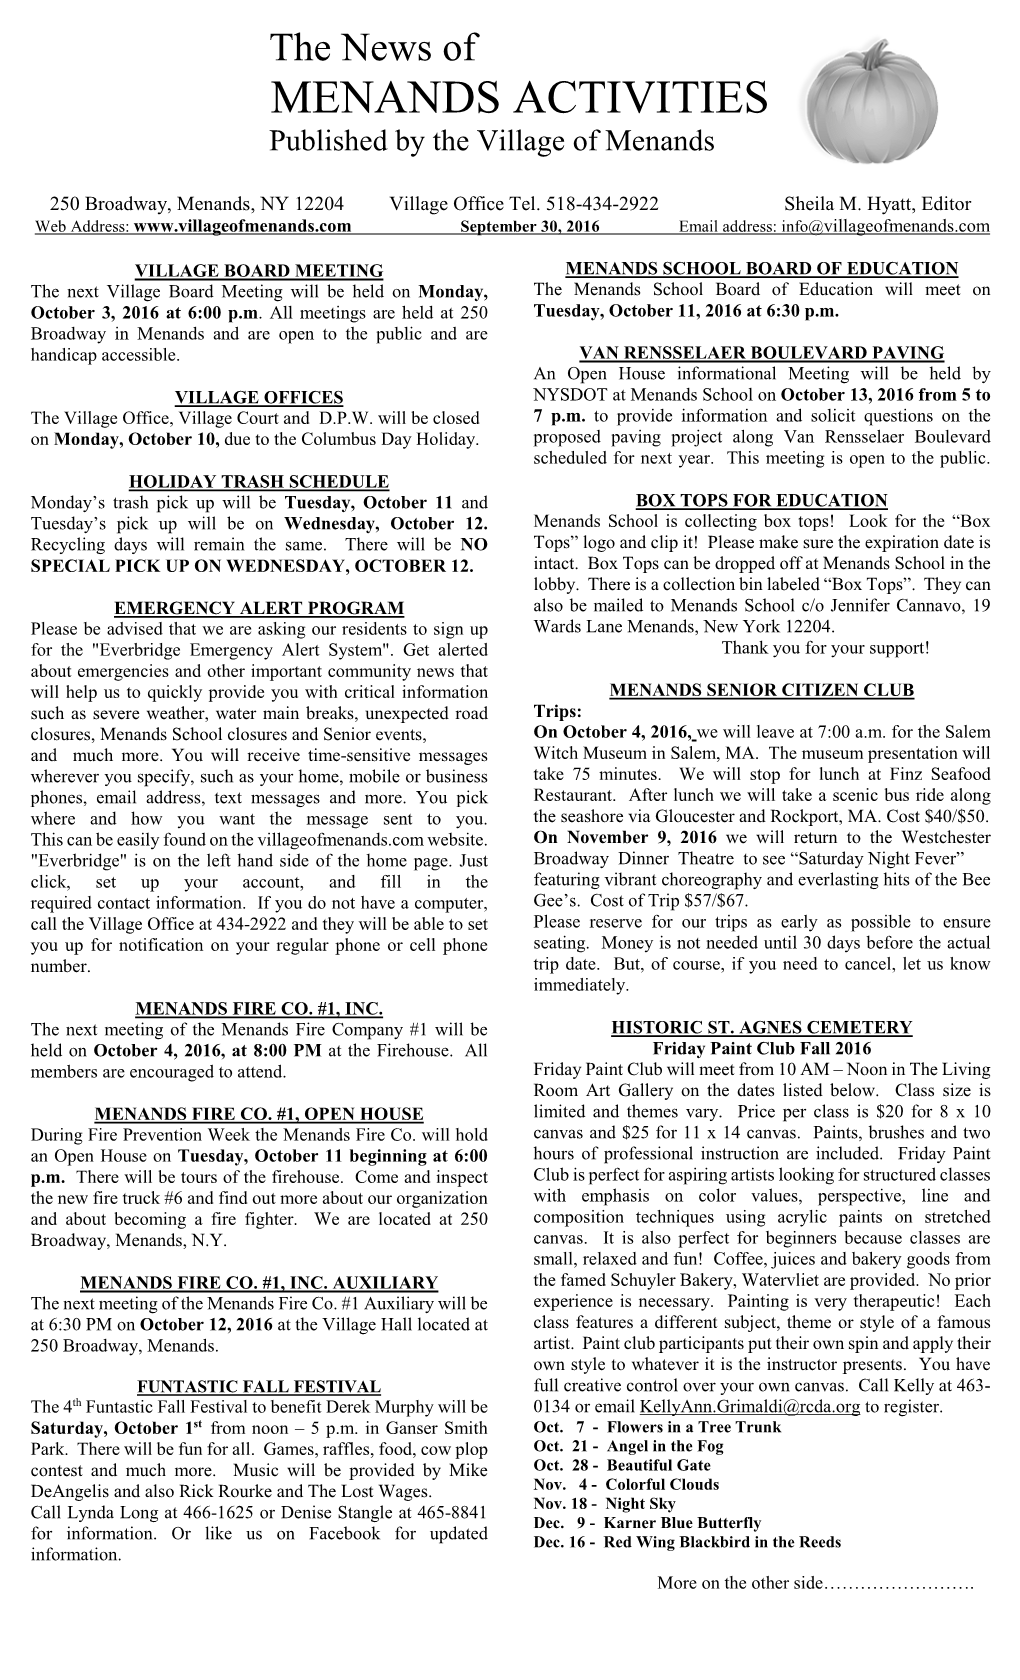 MENANDS ACTIVITIES Published by the Village of Menands